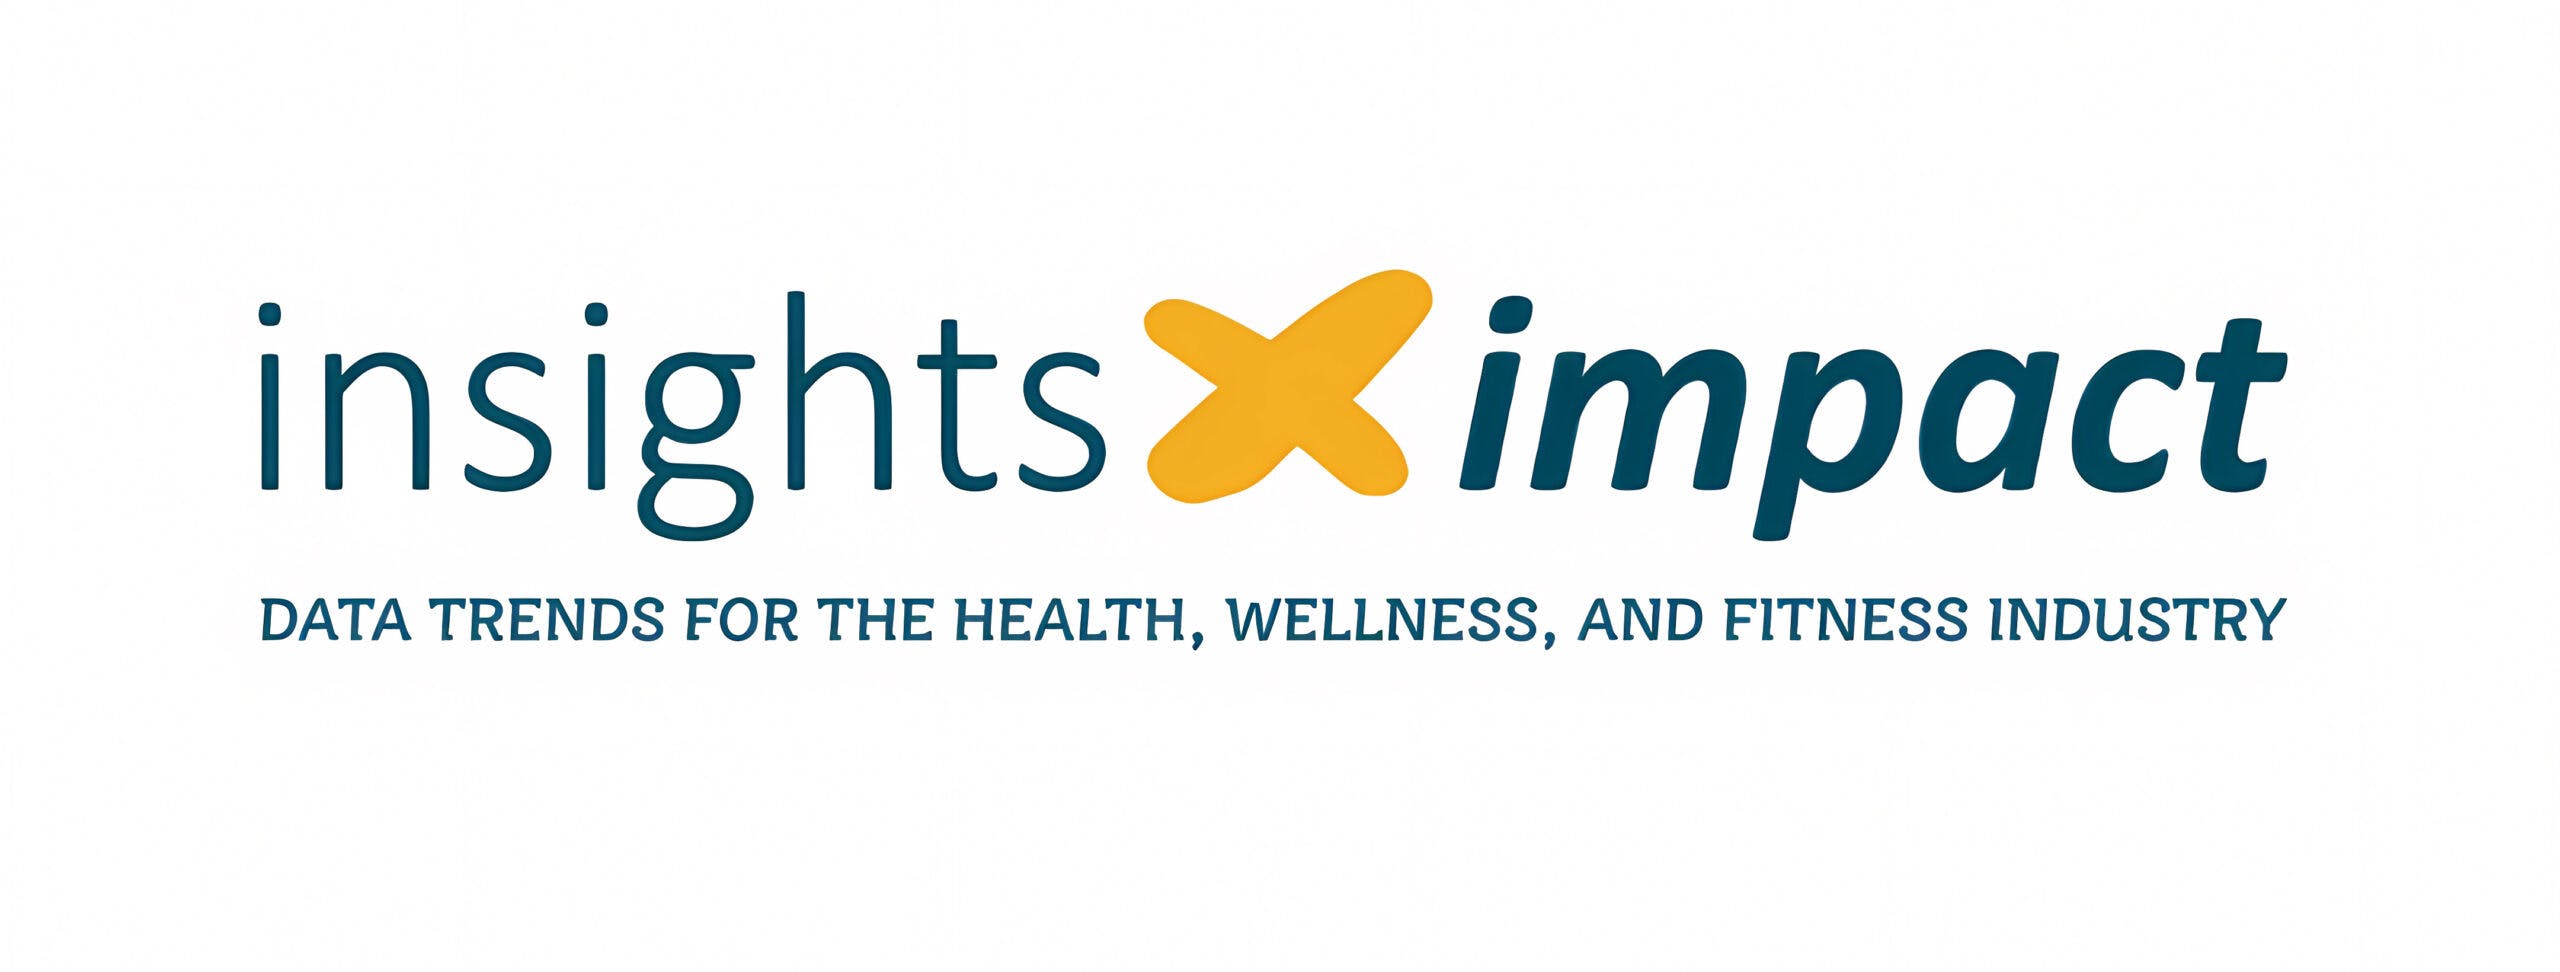 Introducing the Insights and Impact Report: Data Trends for the Health and Wellness Industry